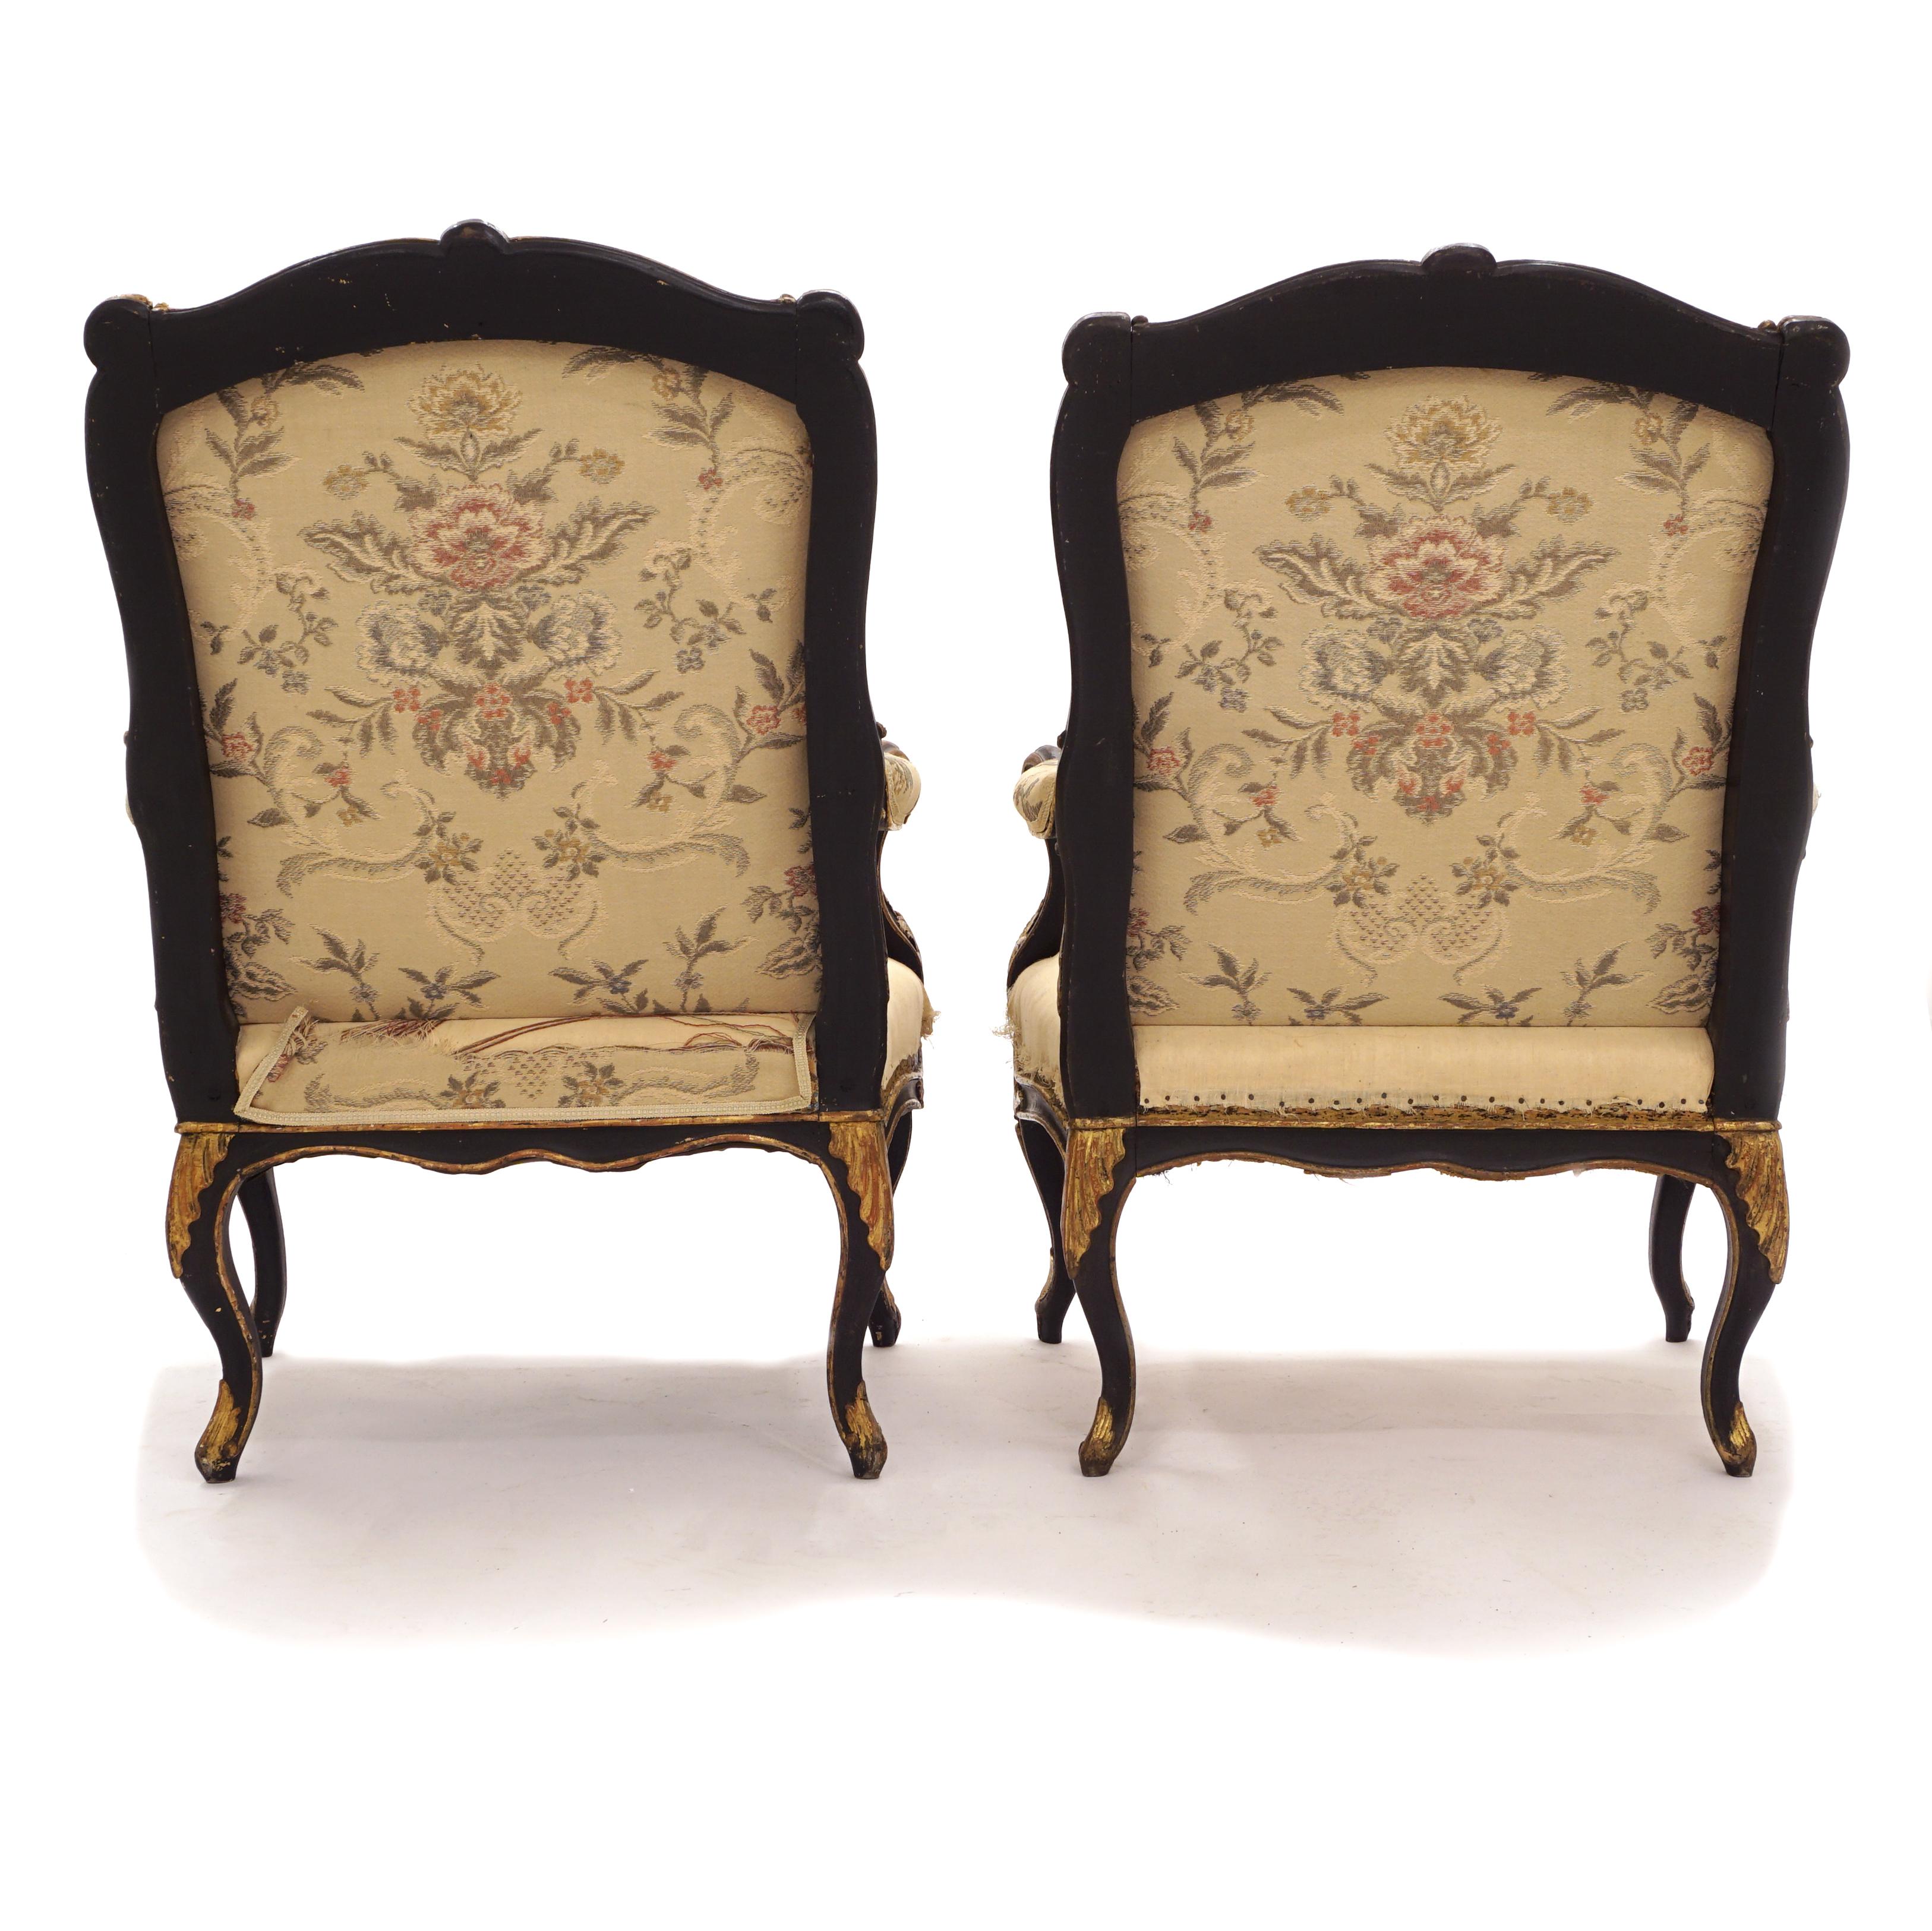 Impressive Pair of French Mid 18th Century Black and Gilt Rococo Armchairs In Good Condition For Sale In Aabenraa, DK